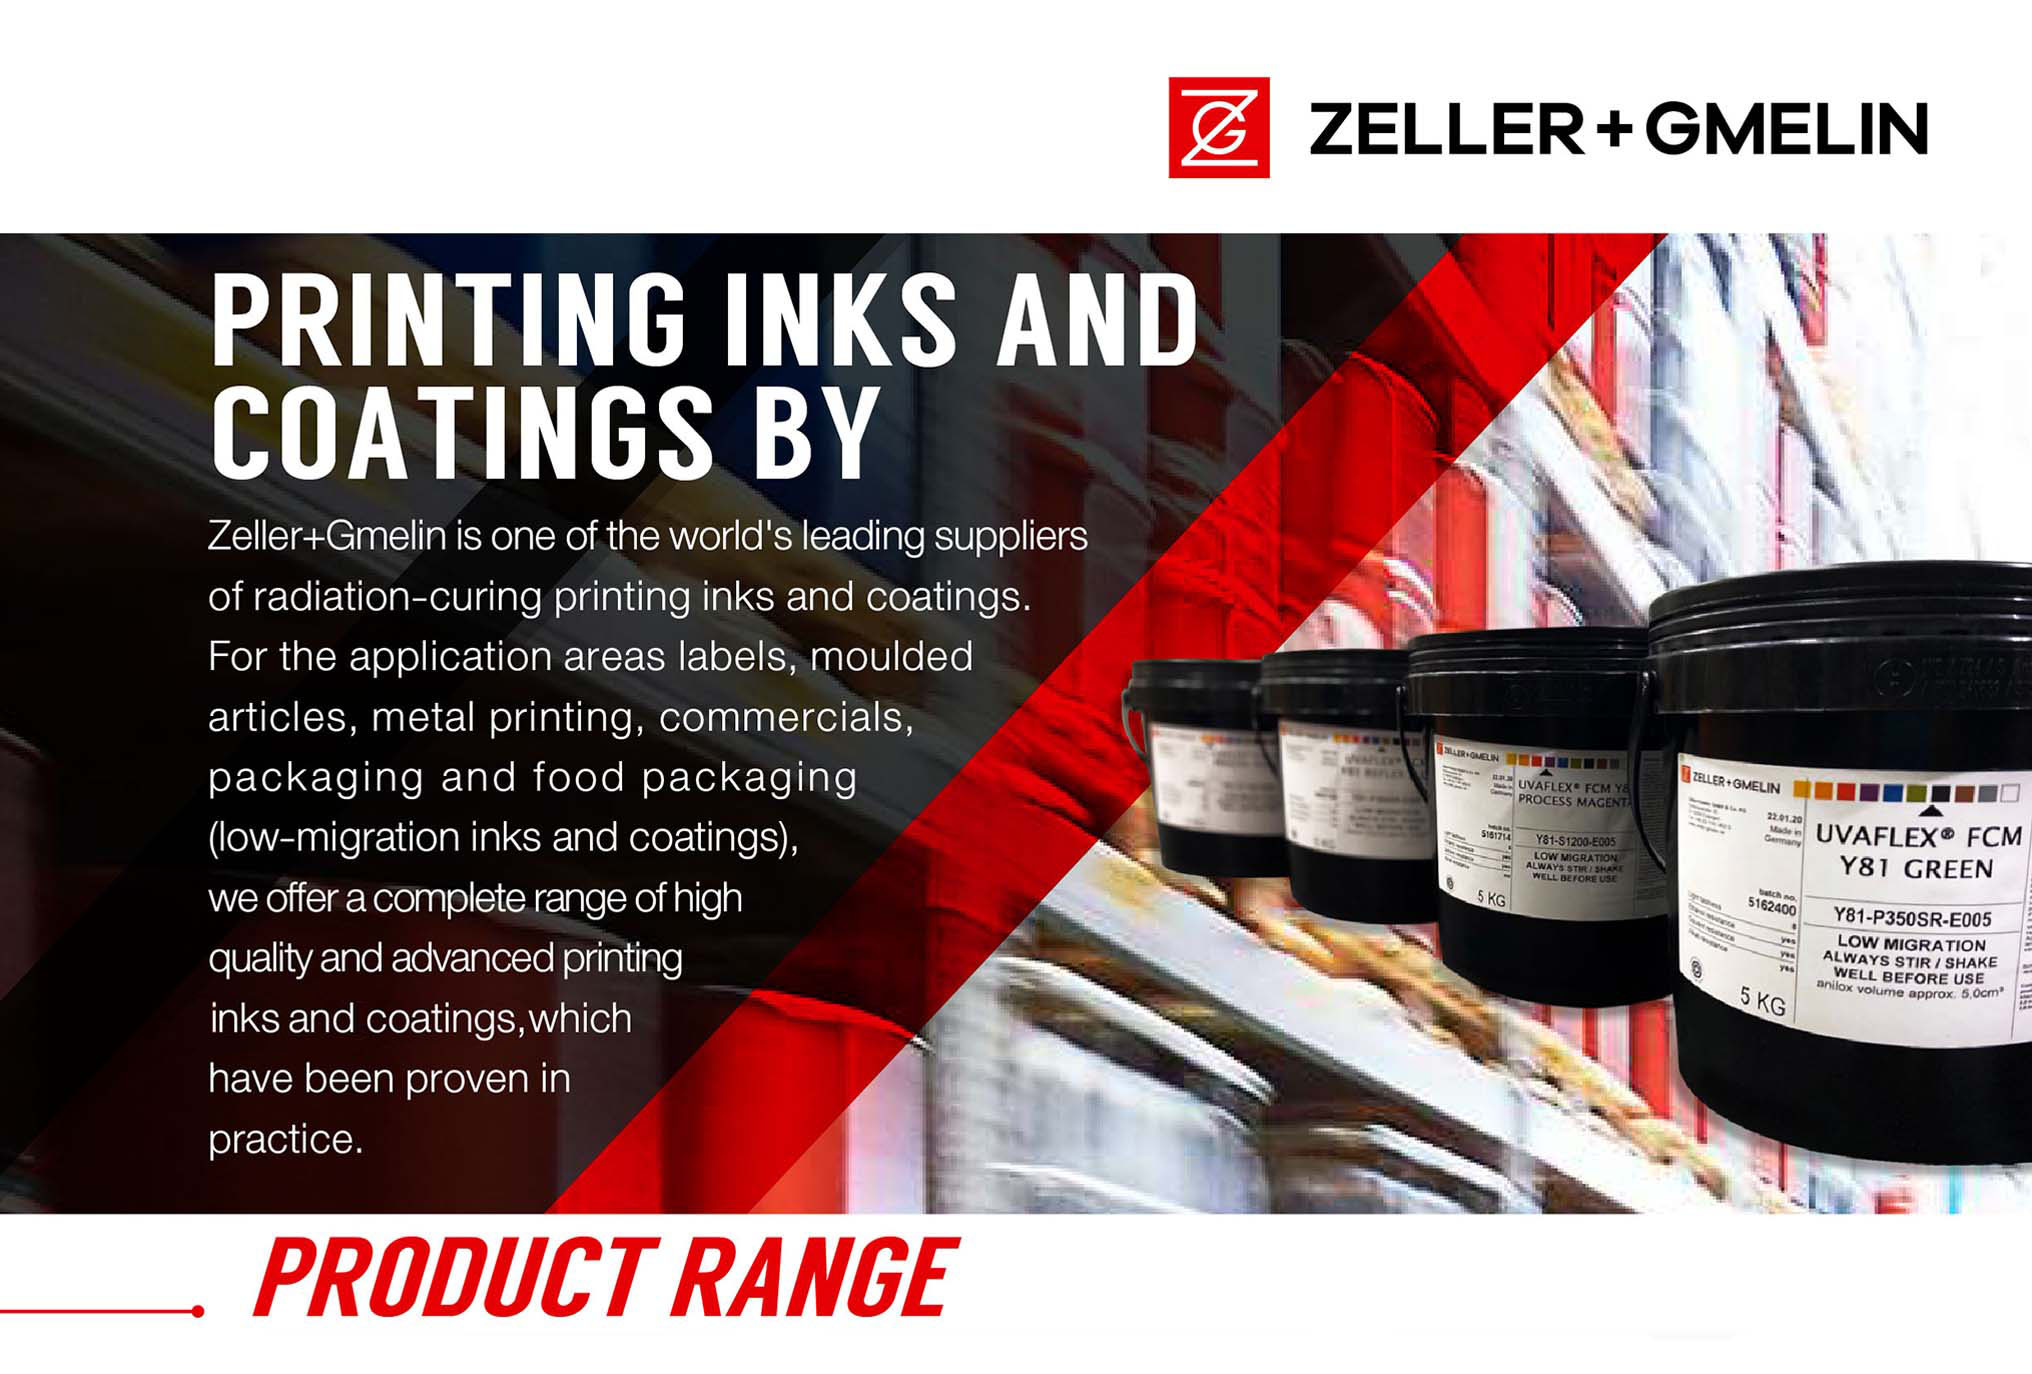 Zeller+Gmelin is one of the world's leading suppliers of radiation-curing printing inks and coatings. For the application areas labels, moulded articles, metal printing, commercials, packaging and food packaging (low-migration inks and coatings), we offer a complete range of high quality and advanced printing nks and coatings, which have been proven in practice. 